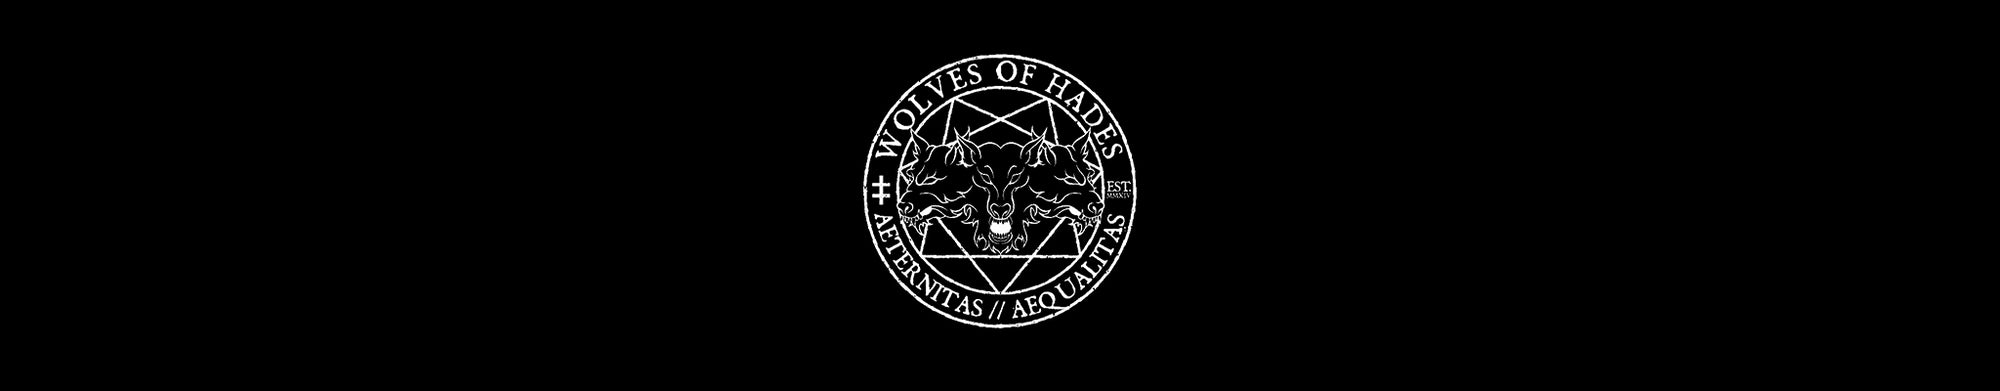 WOLVES OF HADES RECORDS